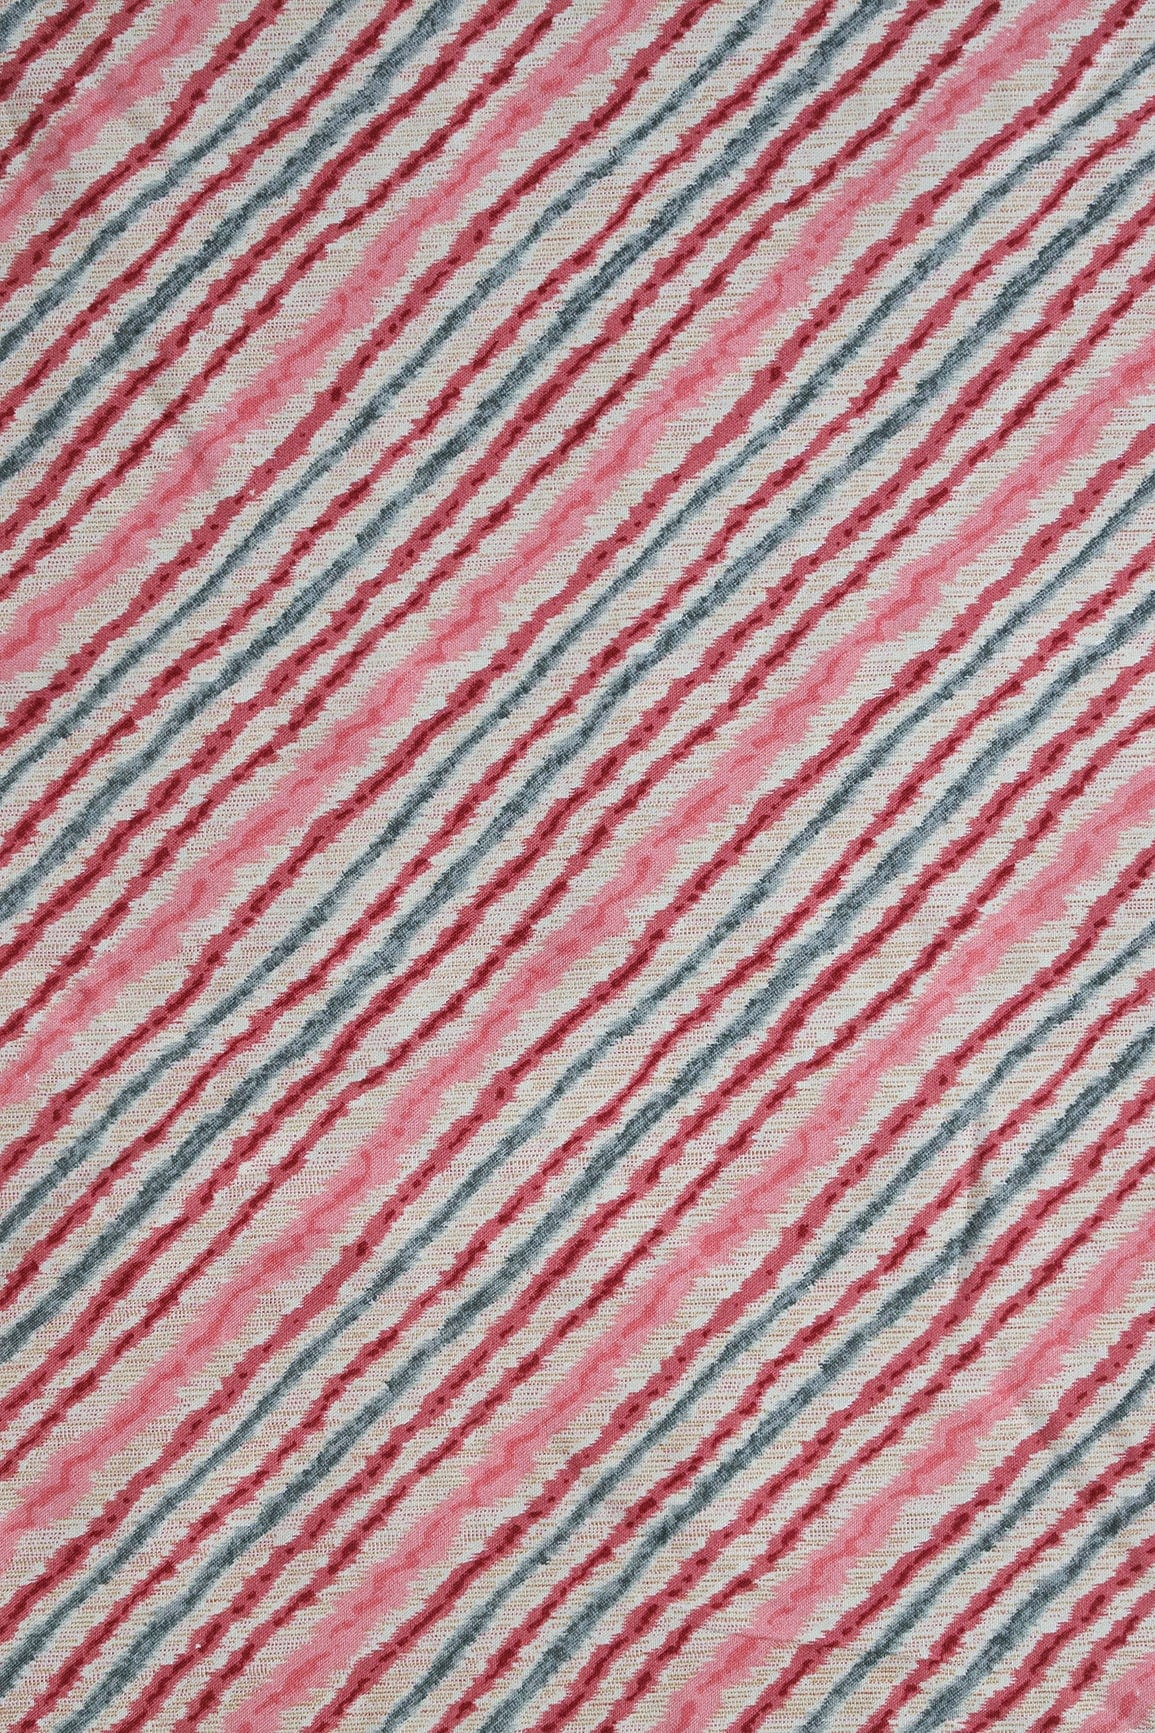 doeraa Prints Pink And Grey Stripes Pattern On Light beige Rayon Fabric